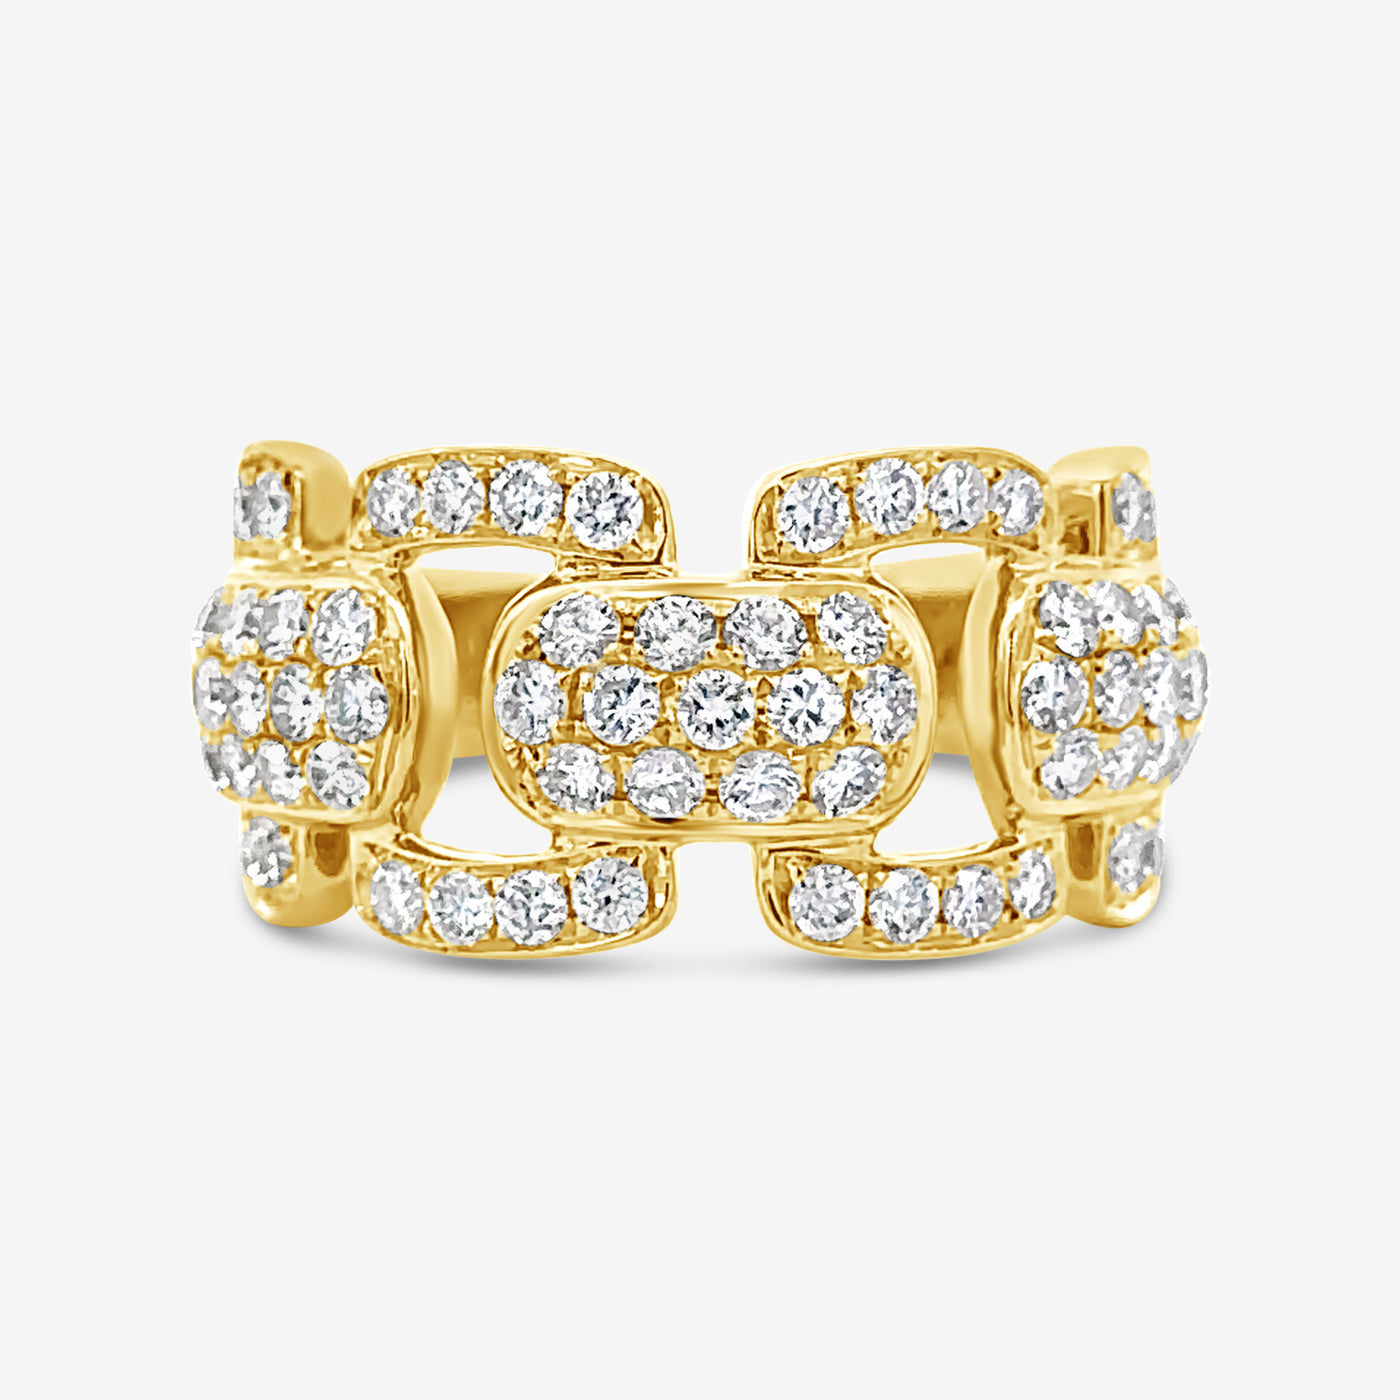 Our Best Selling Diamond Link Ring